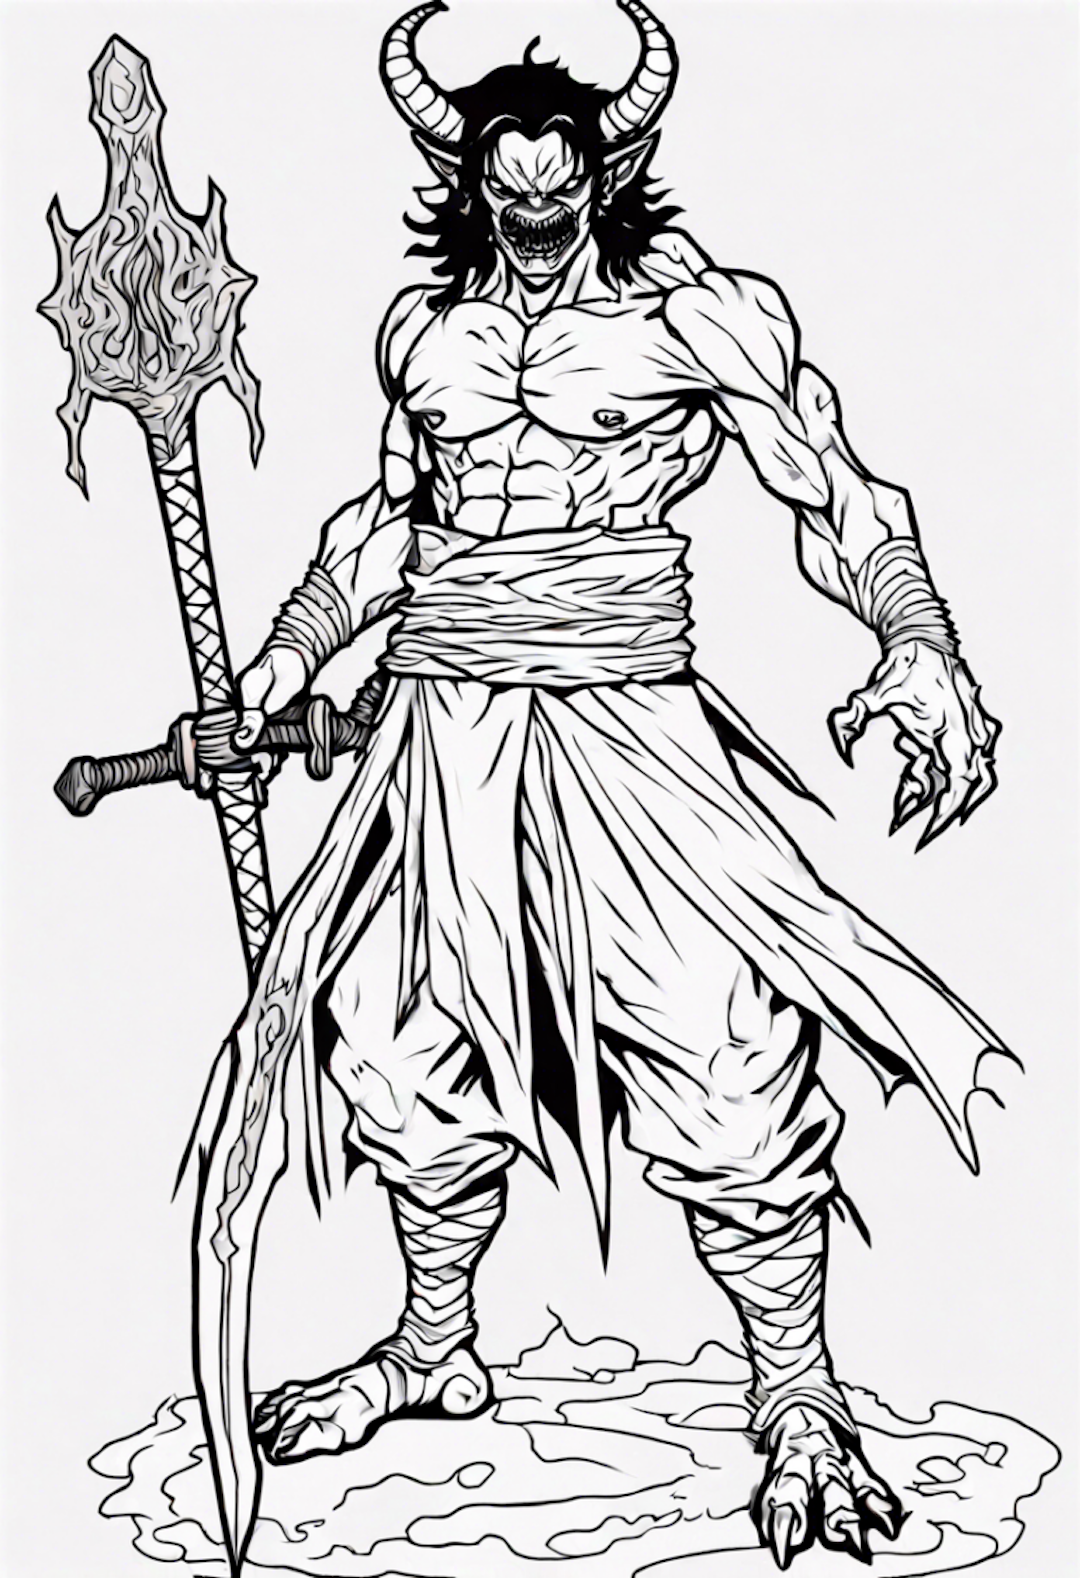 Demon Warlord with Dual Blades Coloring Page coloring pages